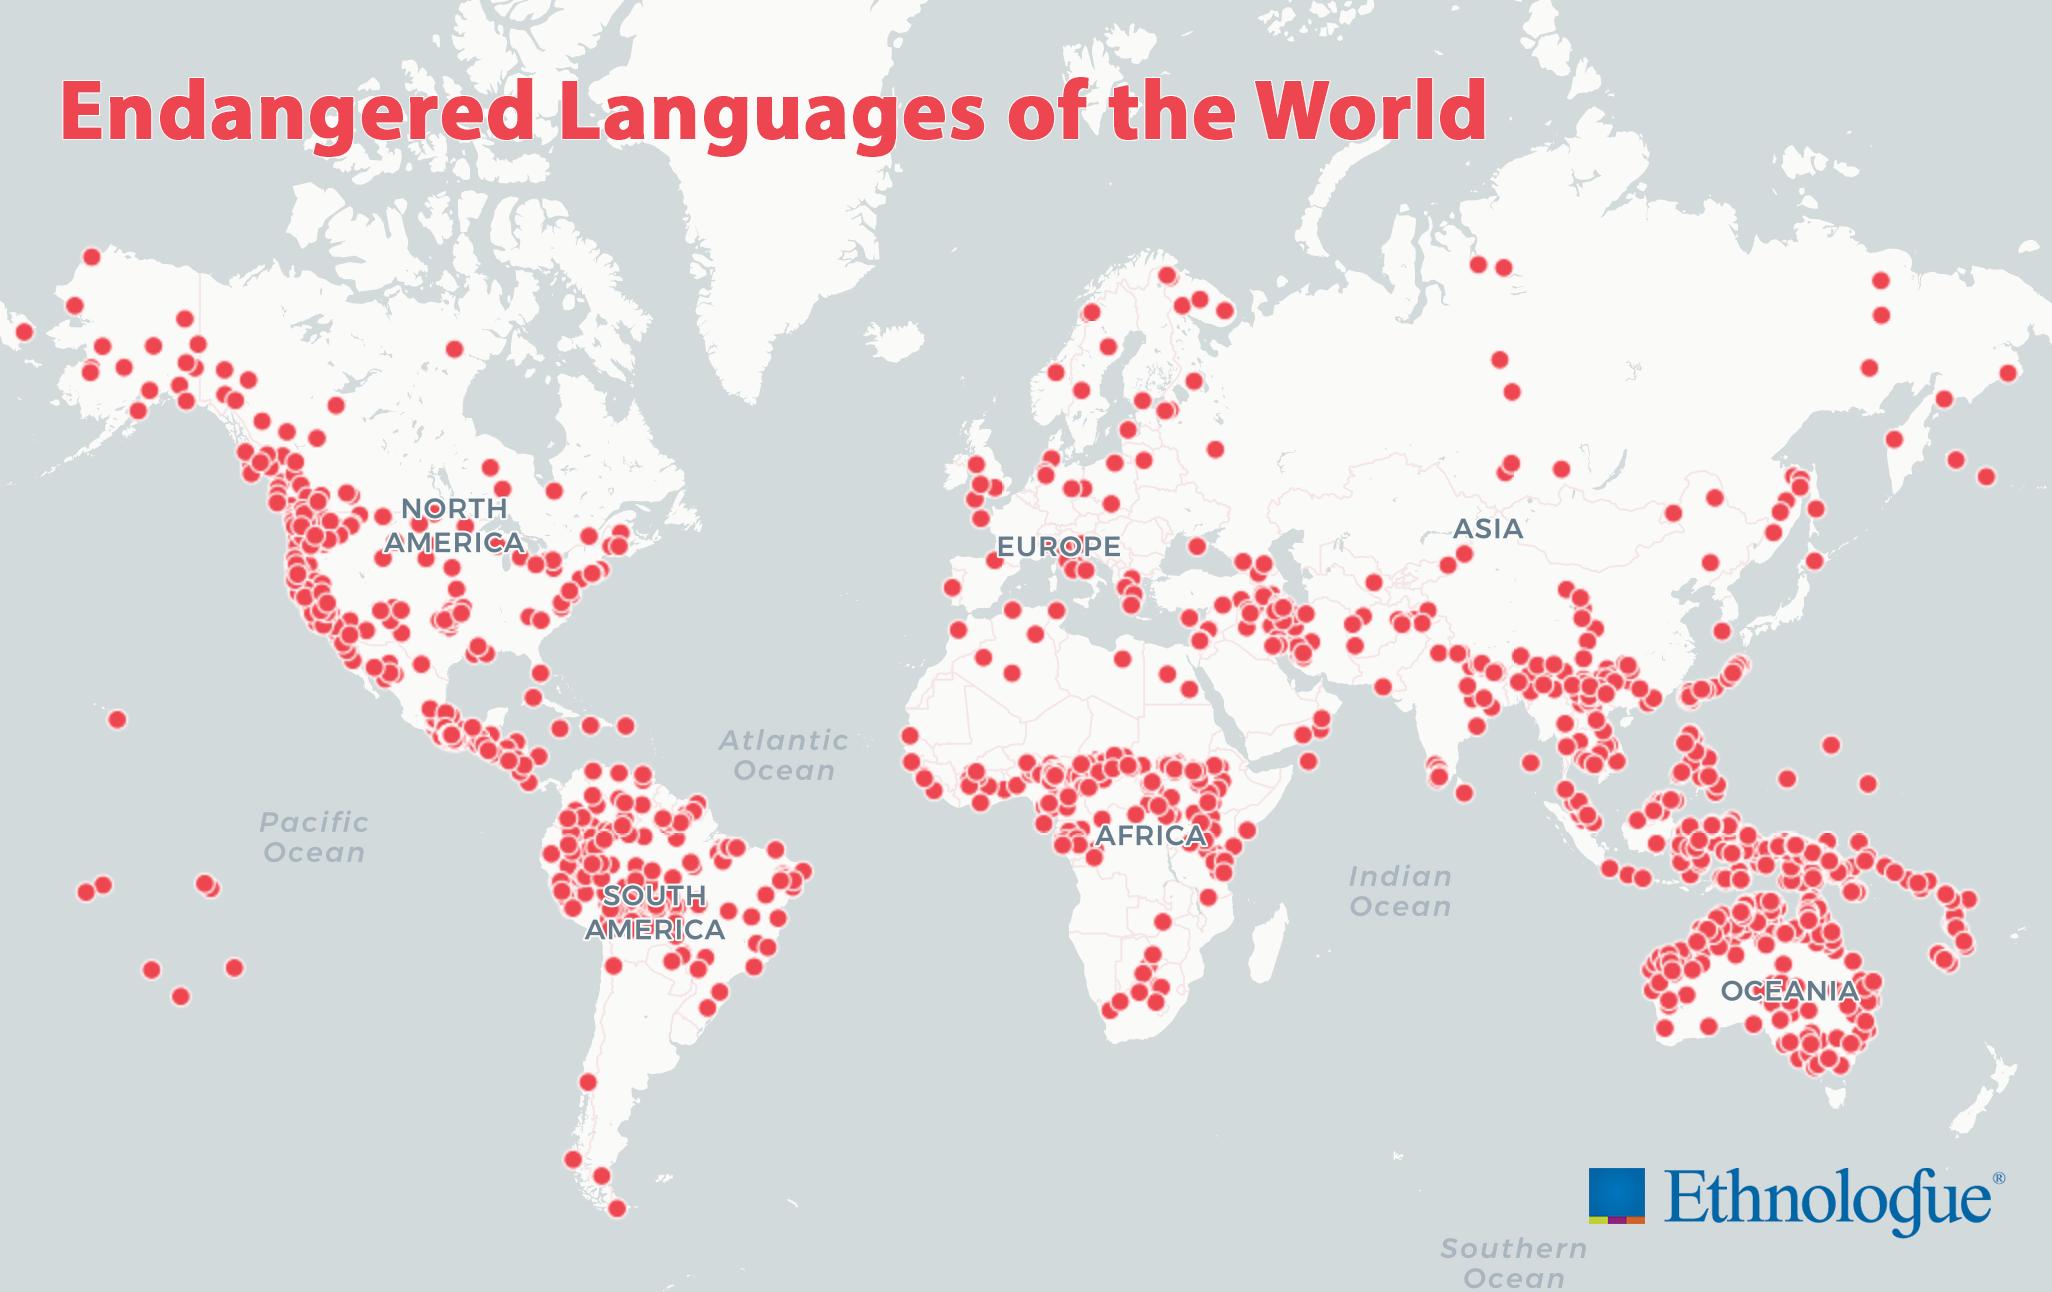 2926 languages endangered as of 2020 – 41 of all living languages